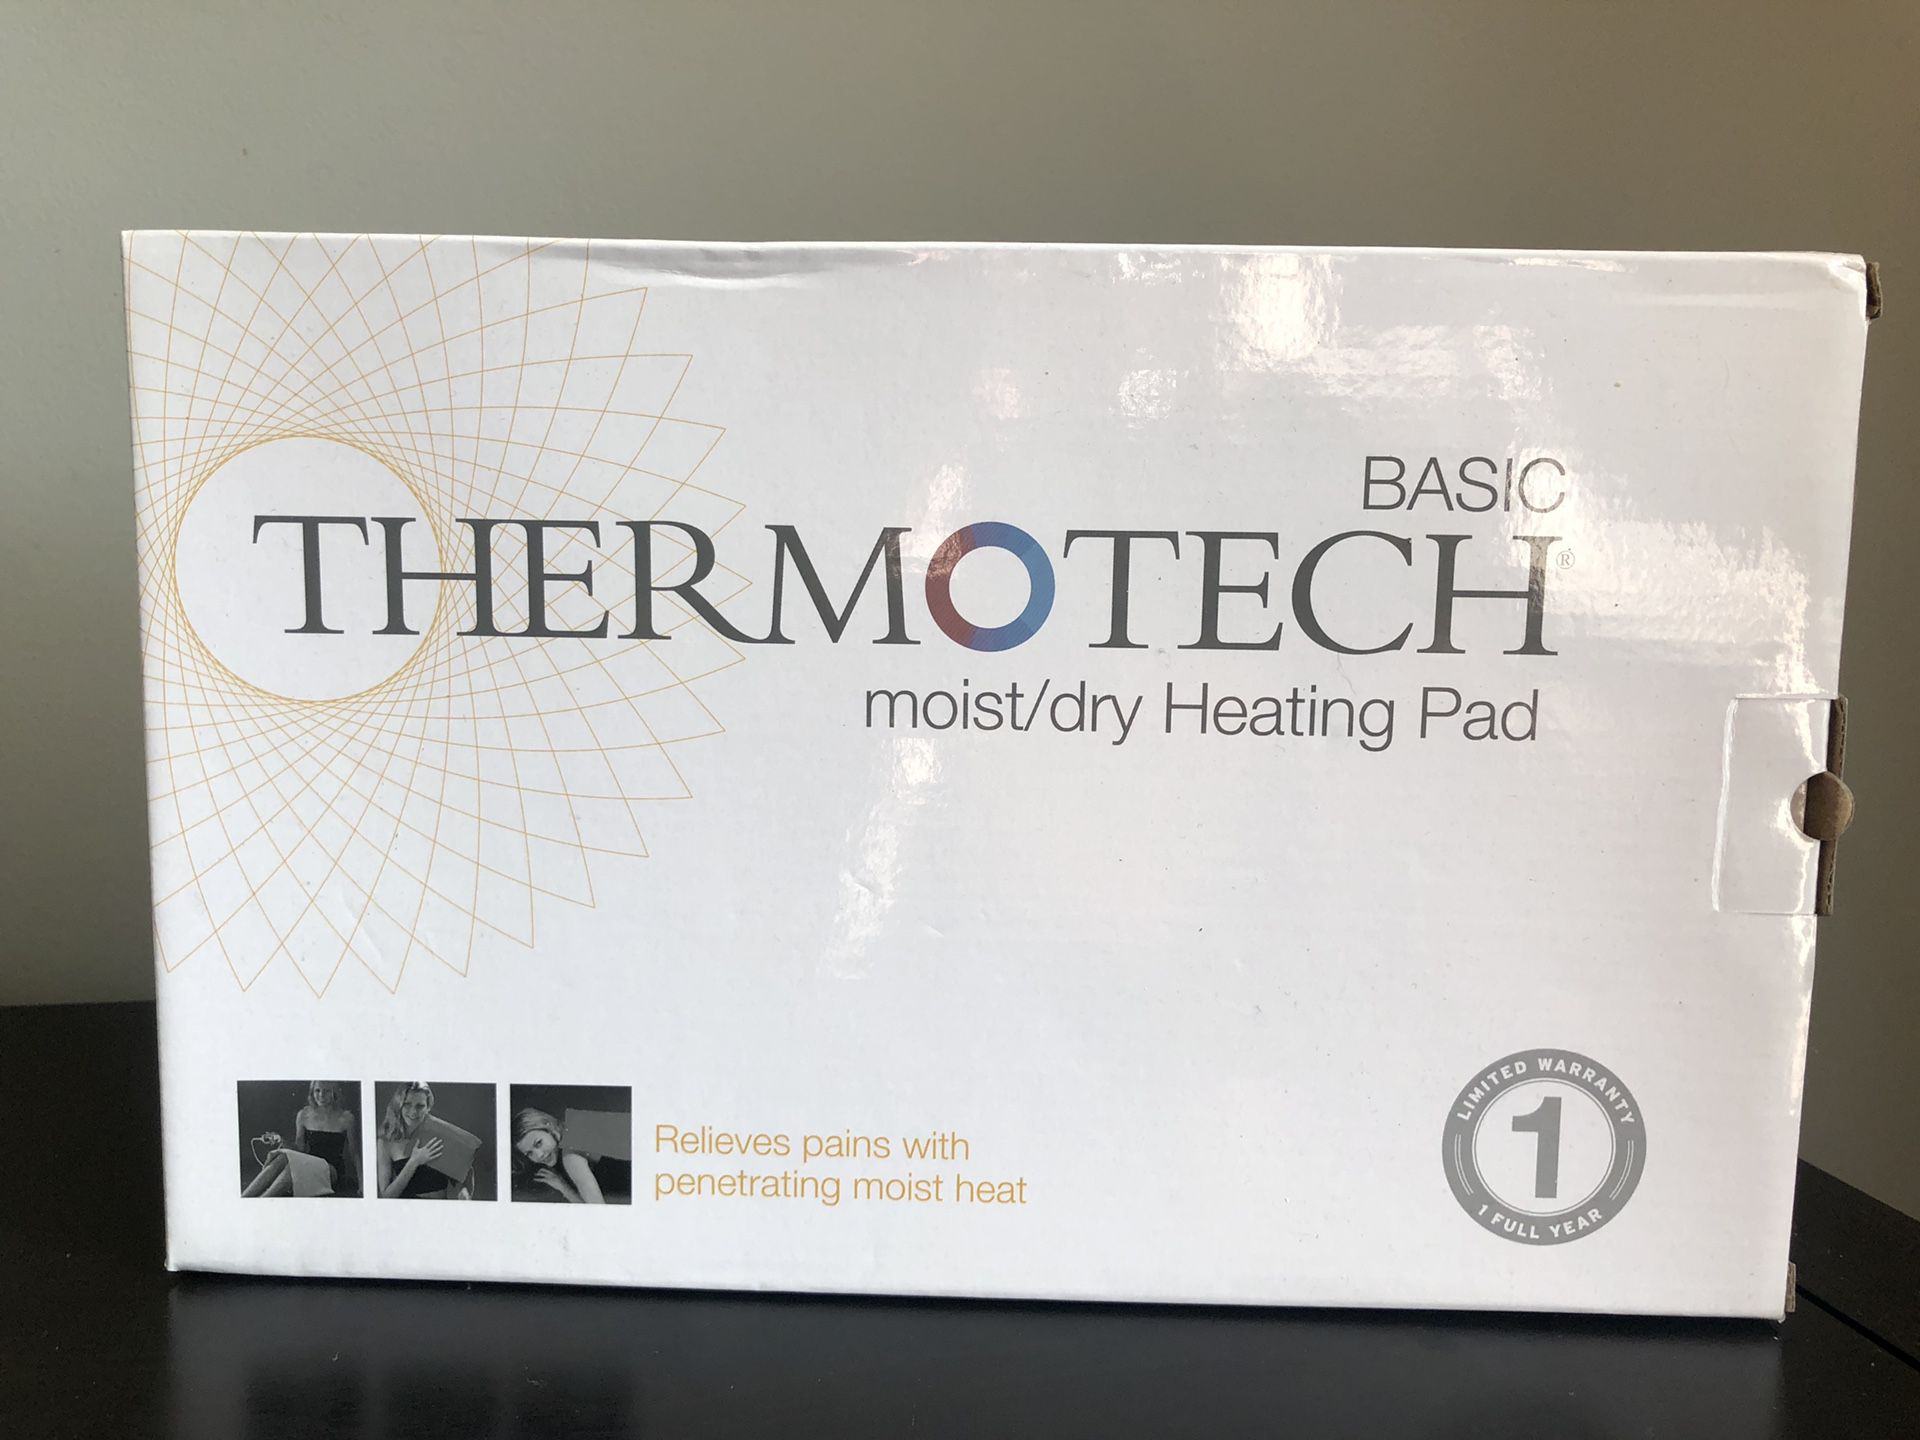 Digital Moist Heating Pads for Neck and Shoulder are the first medical grade electric moist heating pad available to the public. Digital moist heatin